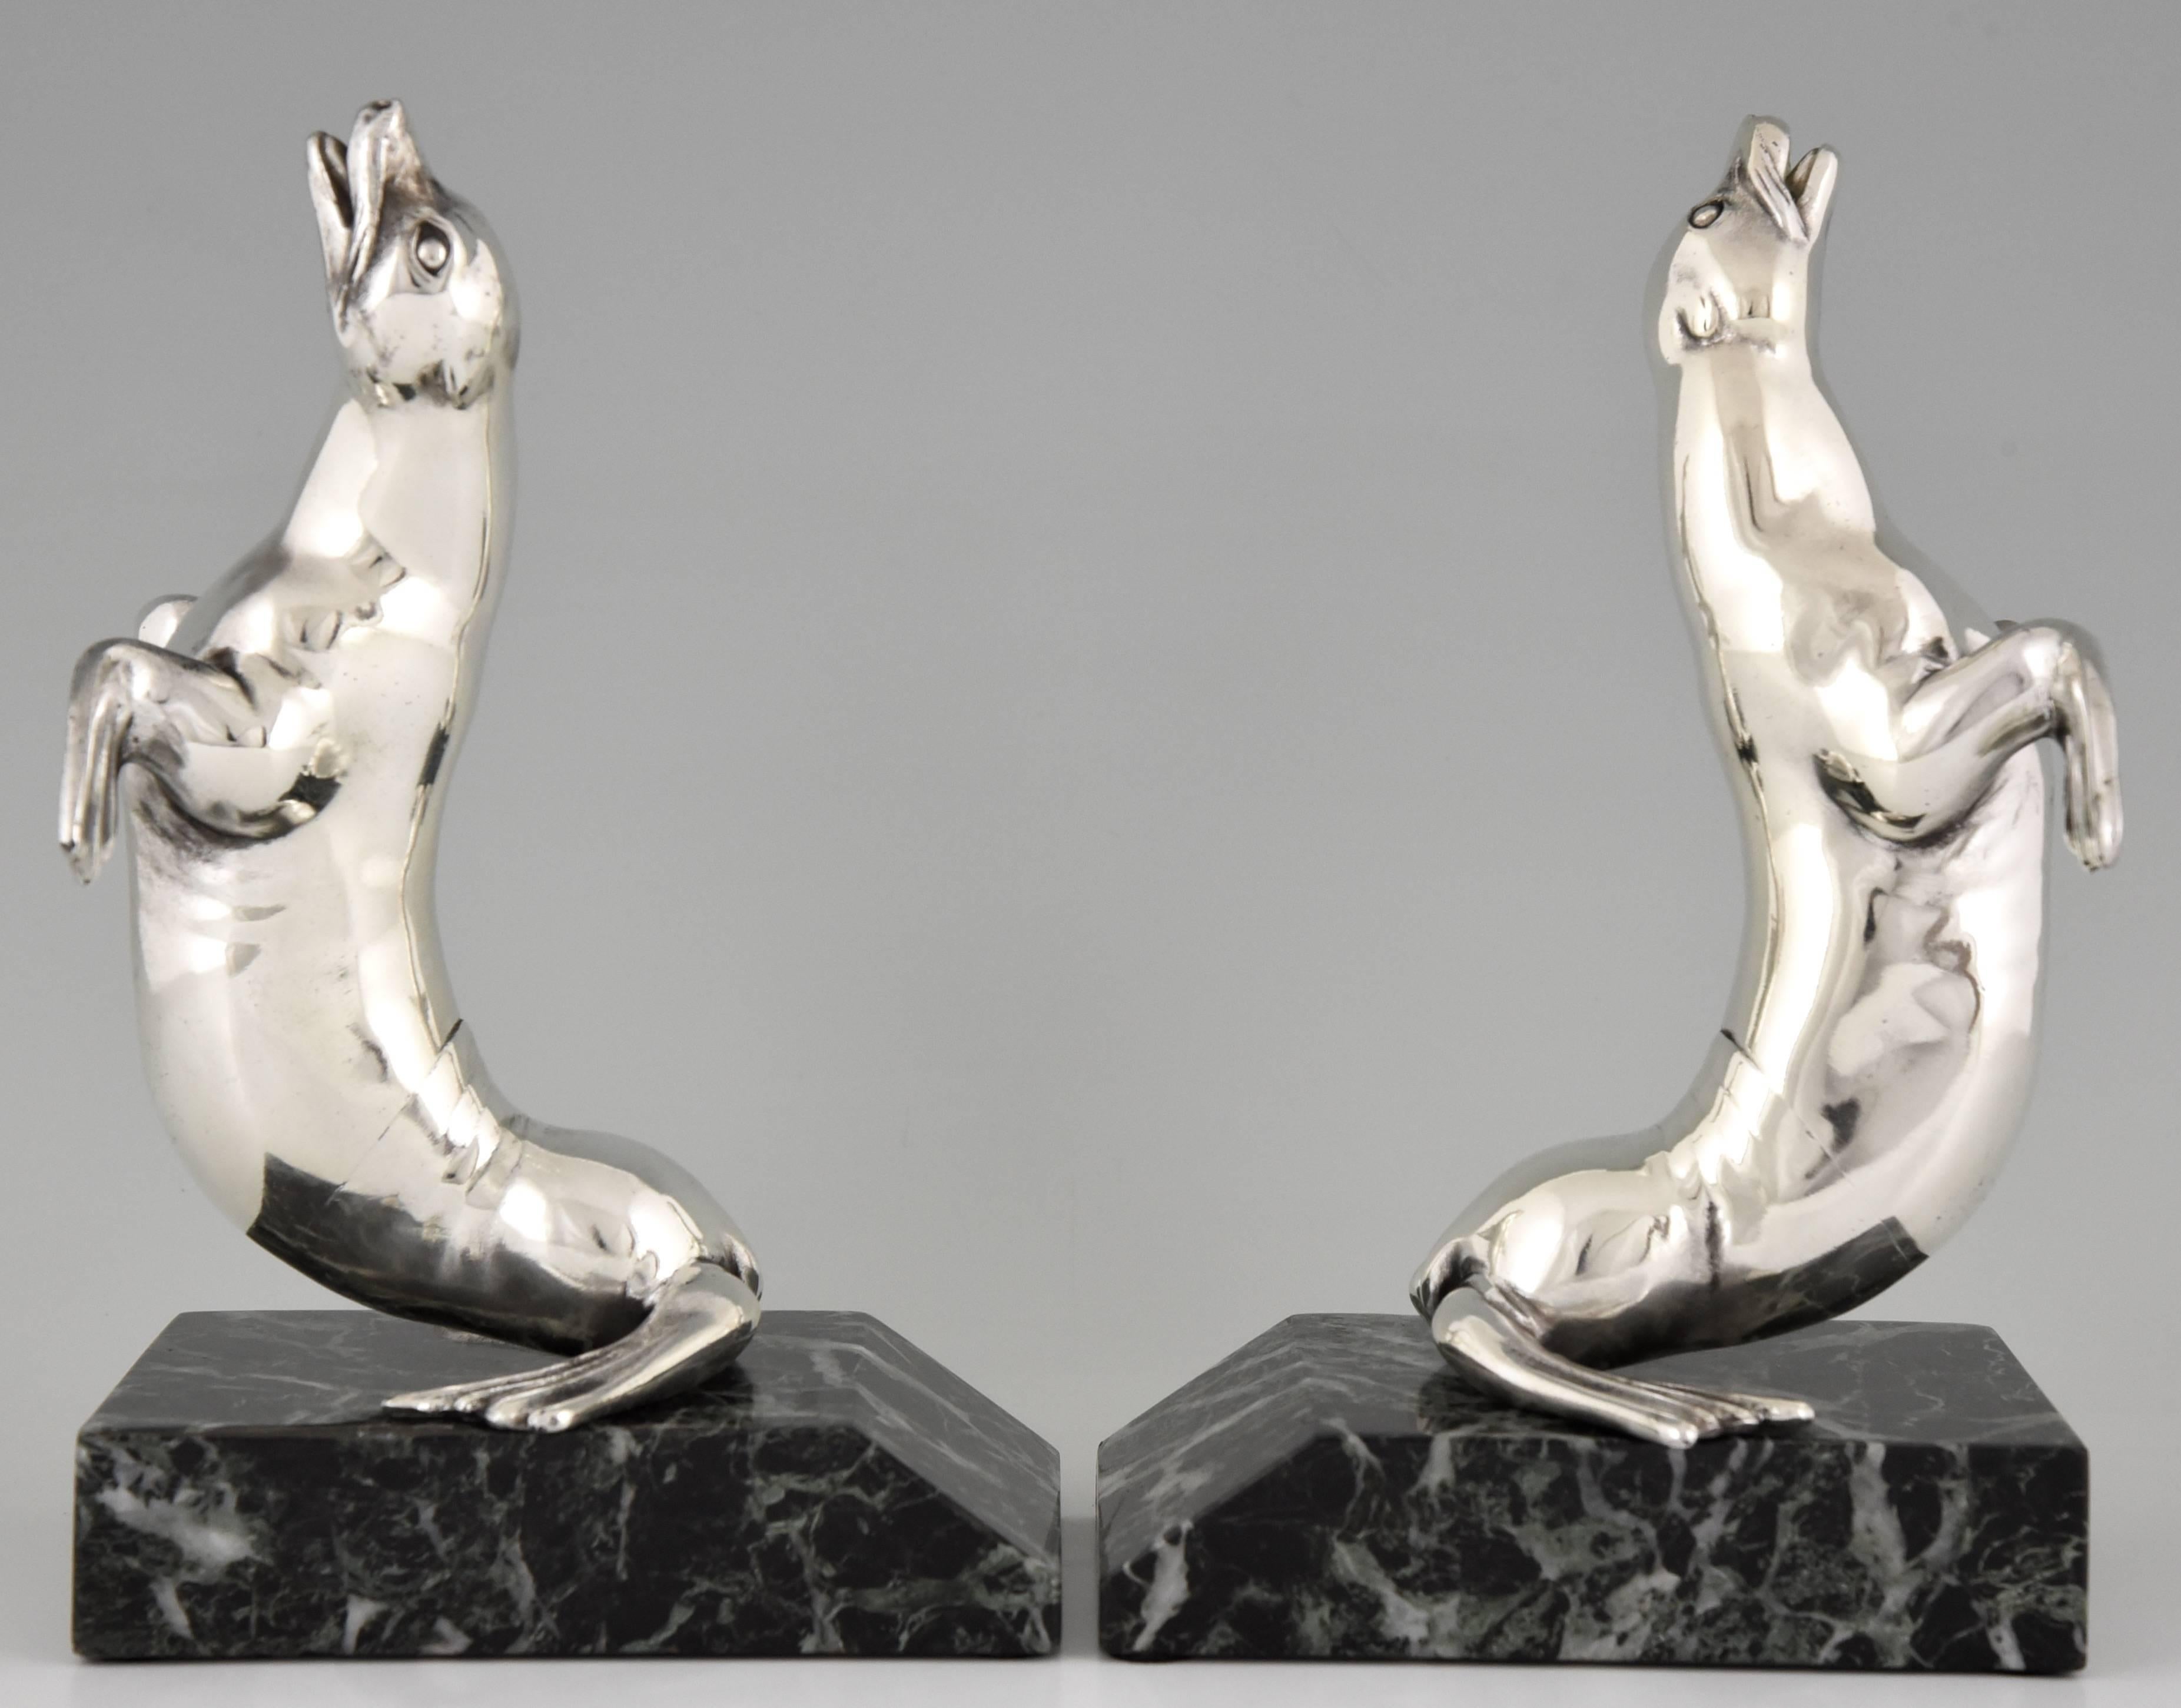 French Art Deco Silvered Seal Bookends by Carvin, 1930 france